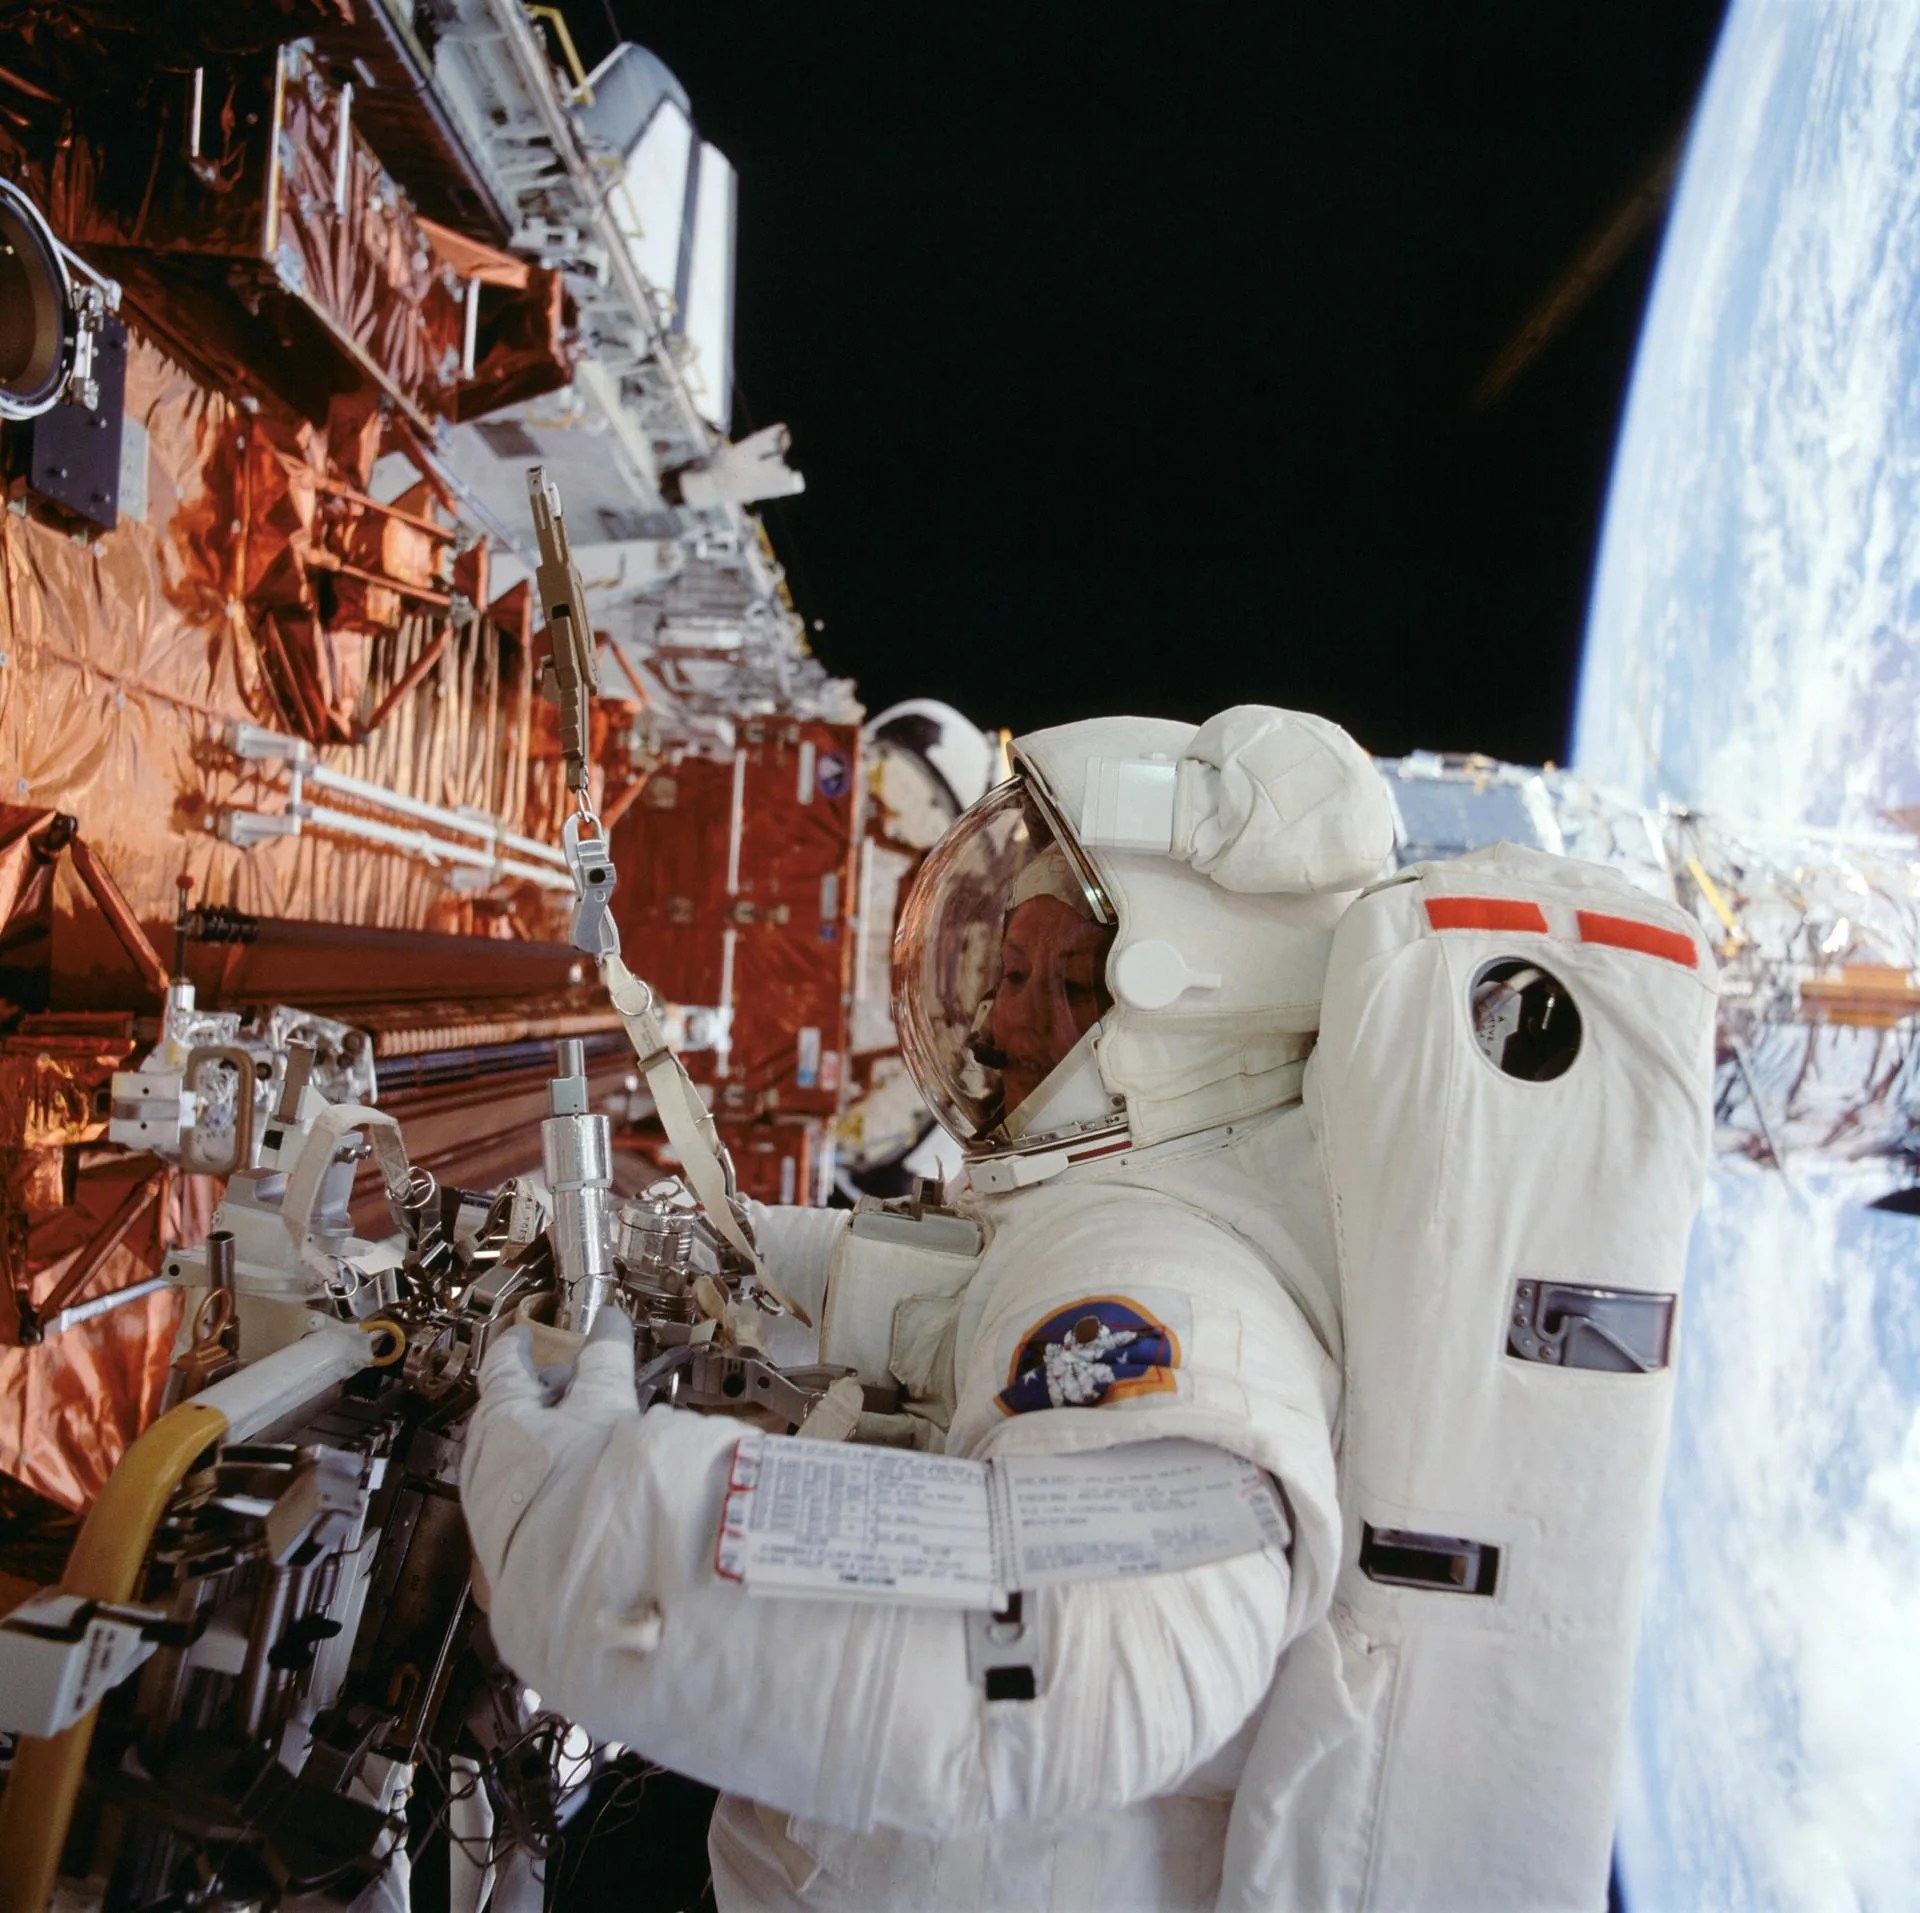 Astronaut Kathryn C. Thornton, center, grips a tool to perform servicing mission tasks on Hubble, left, with the Earth in the background on the right.